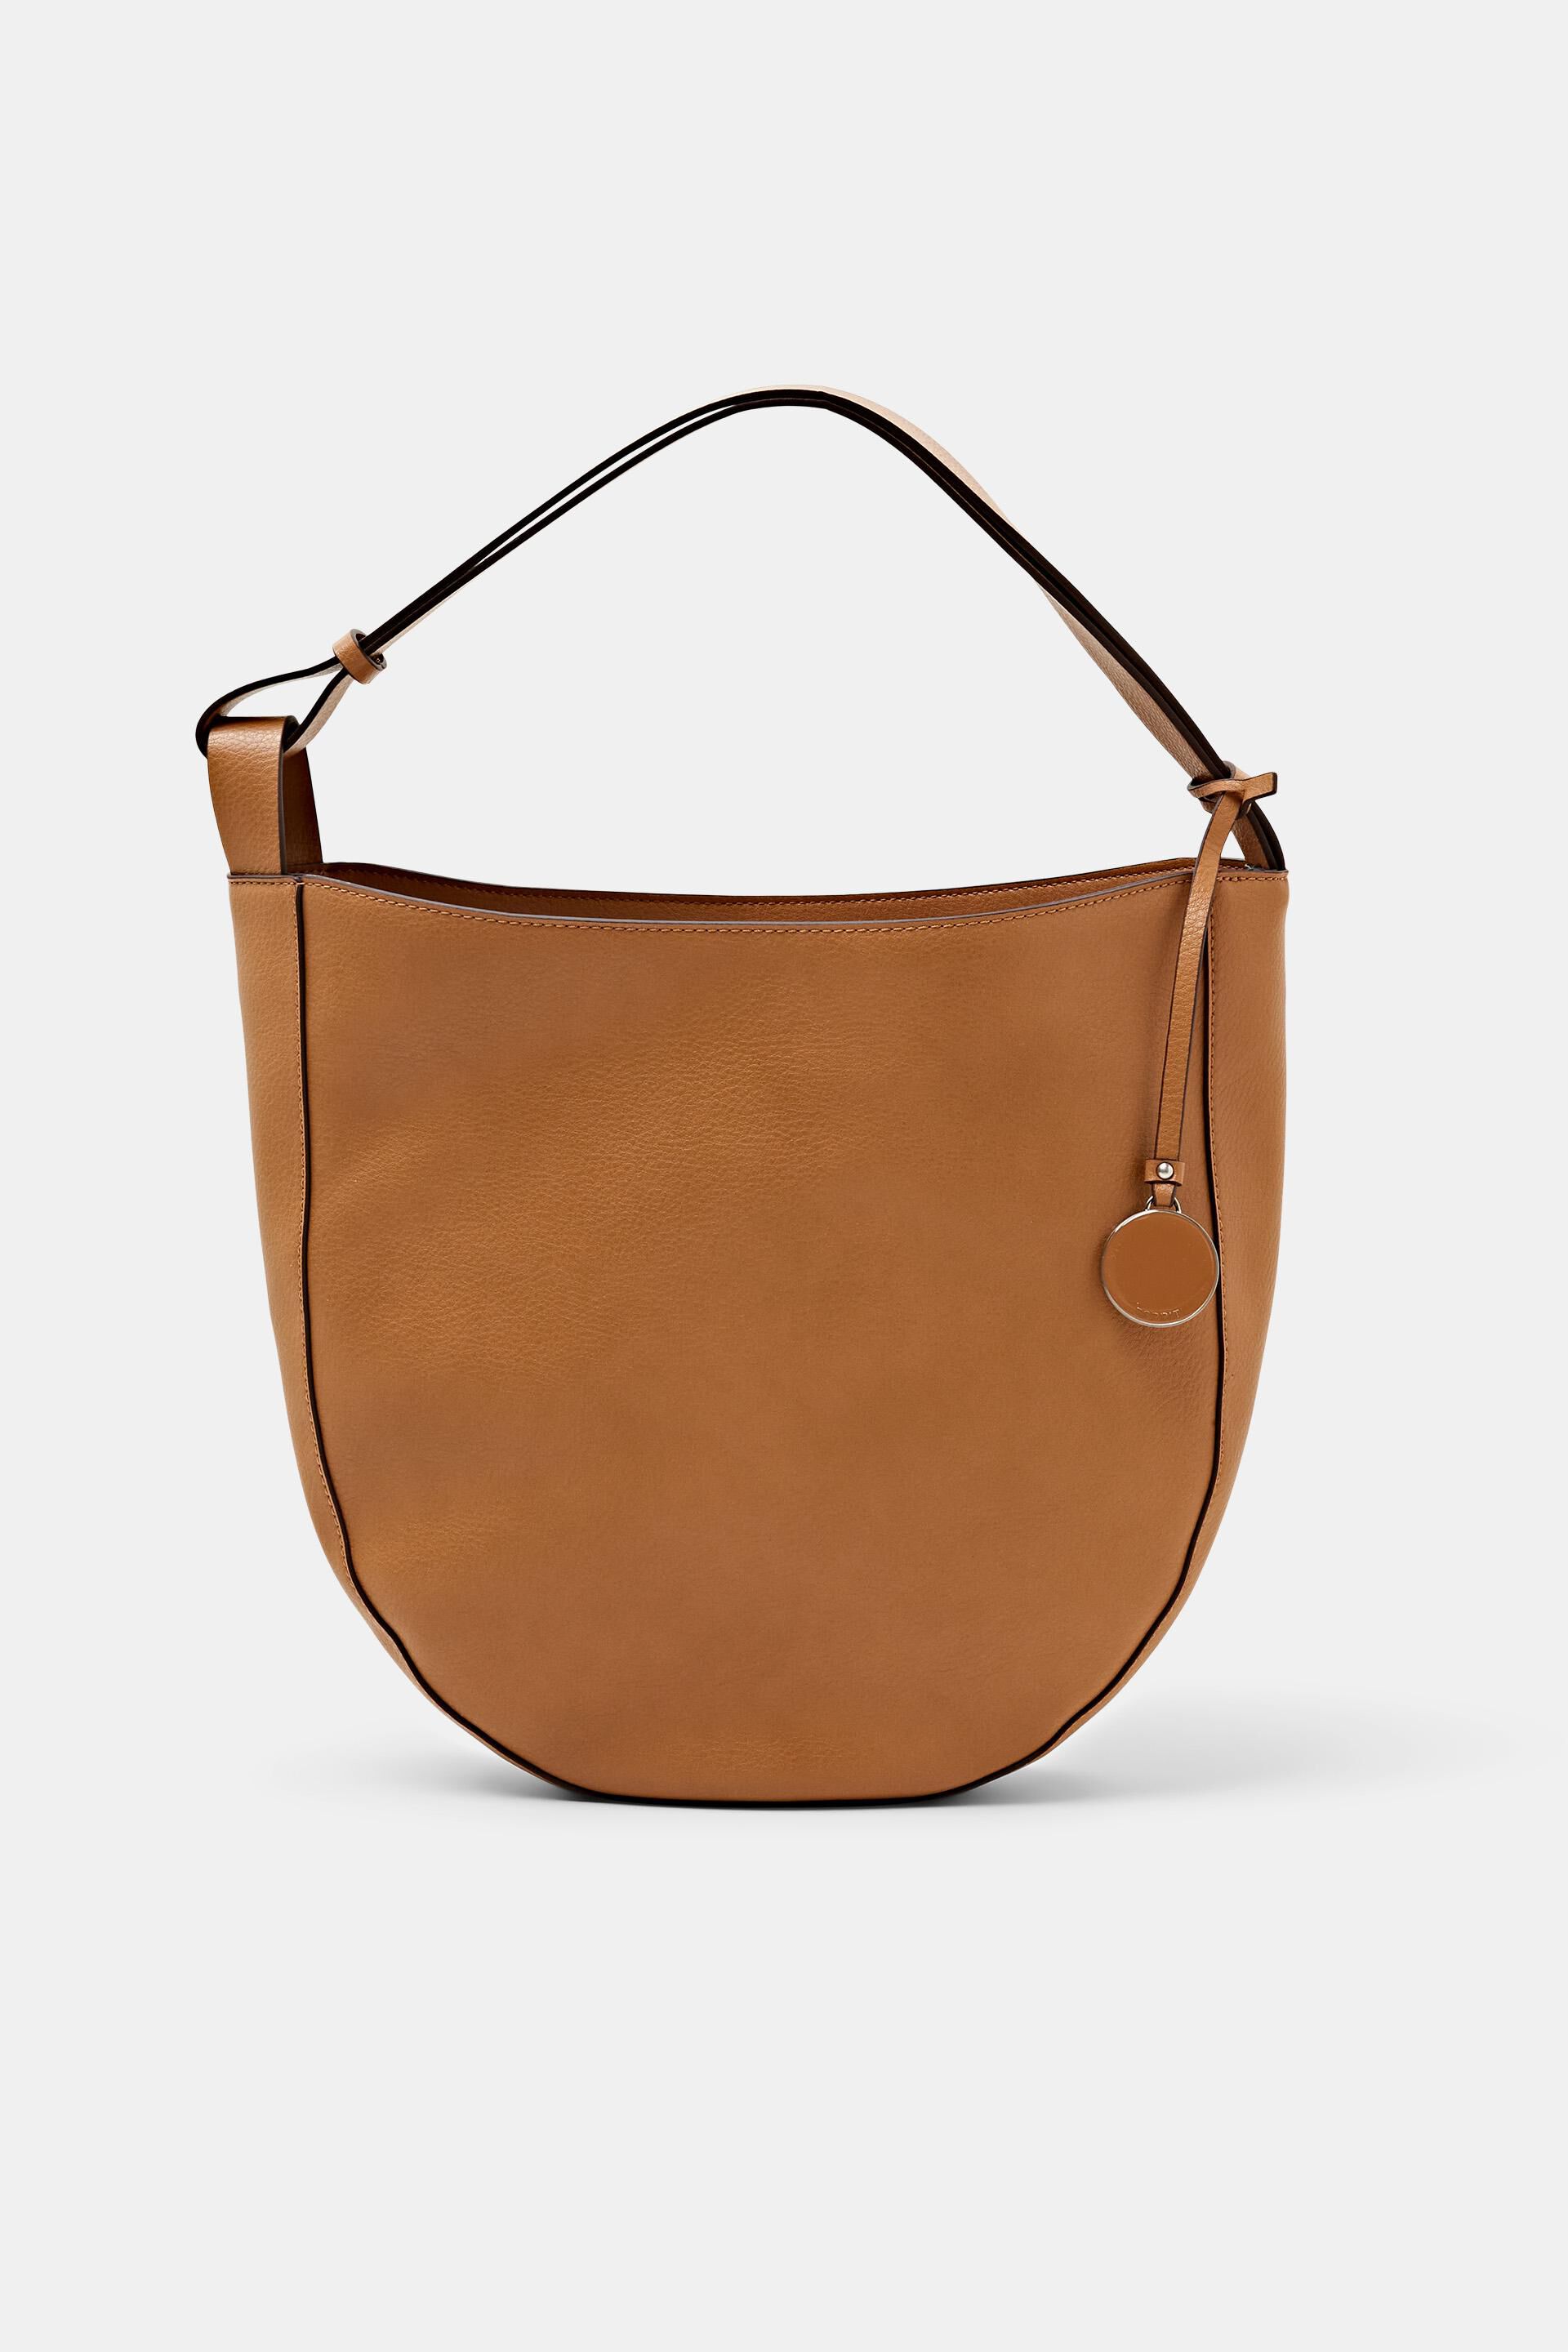 Esprit leather hobo Recycled: bag faux